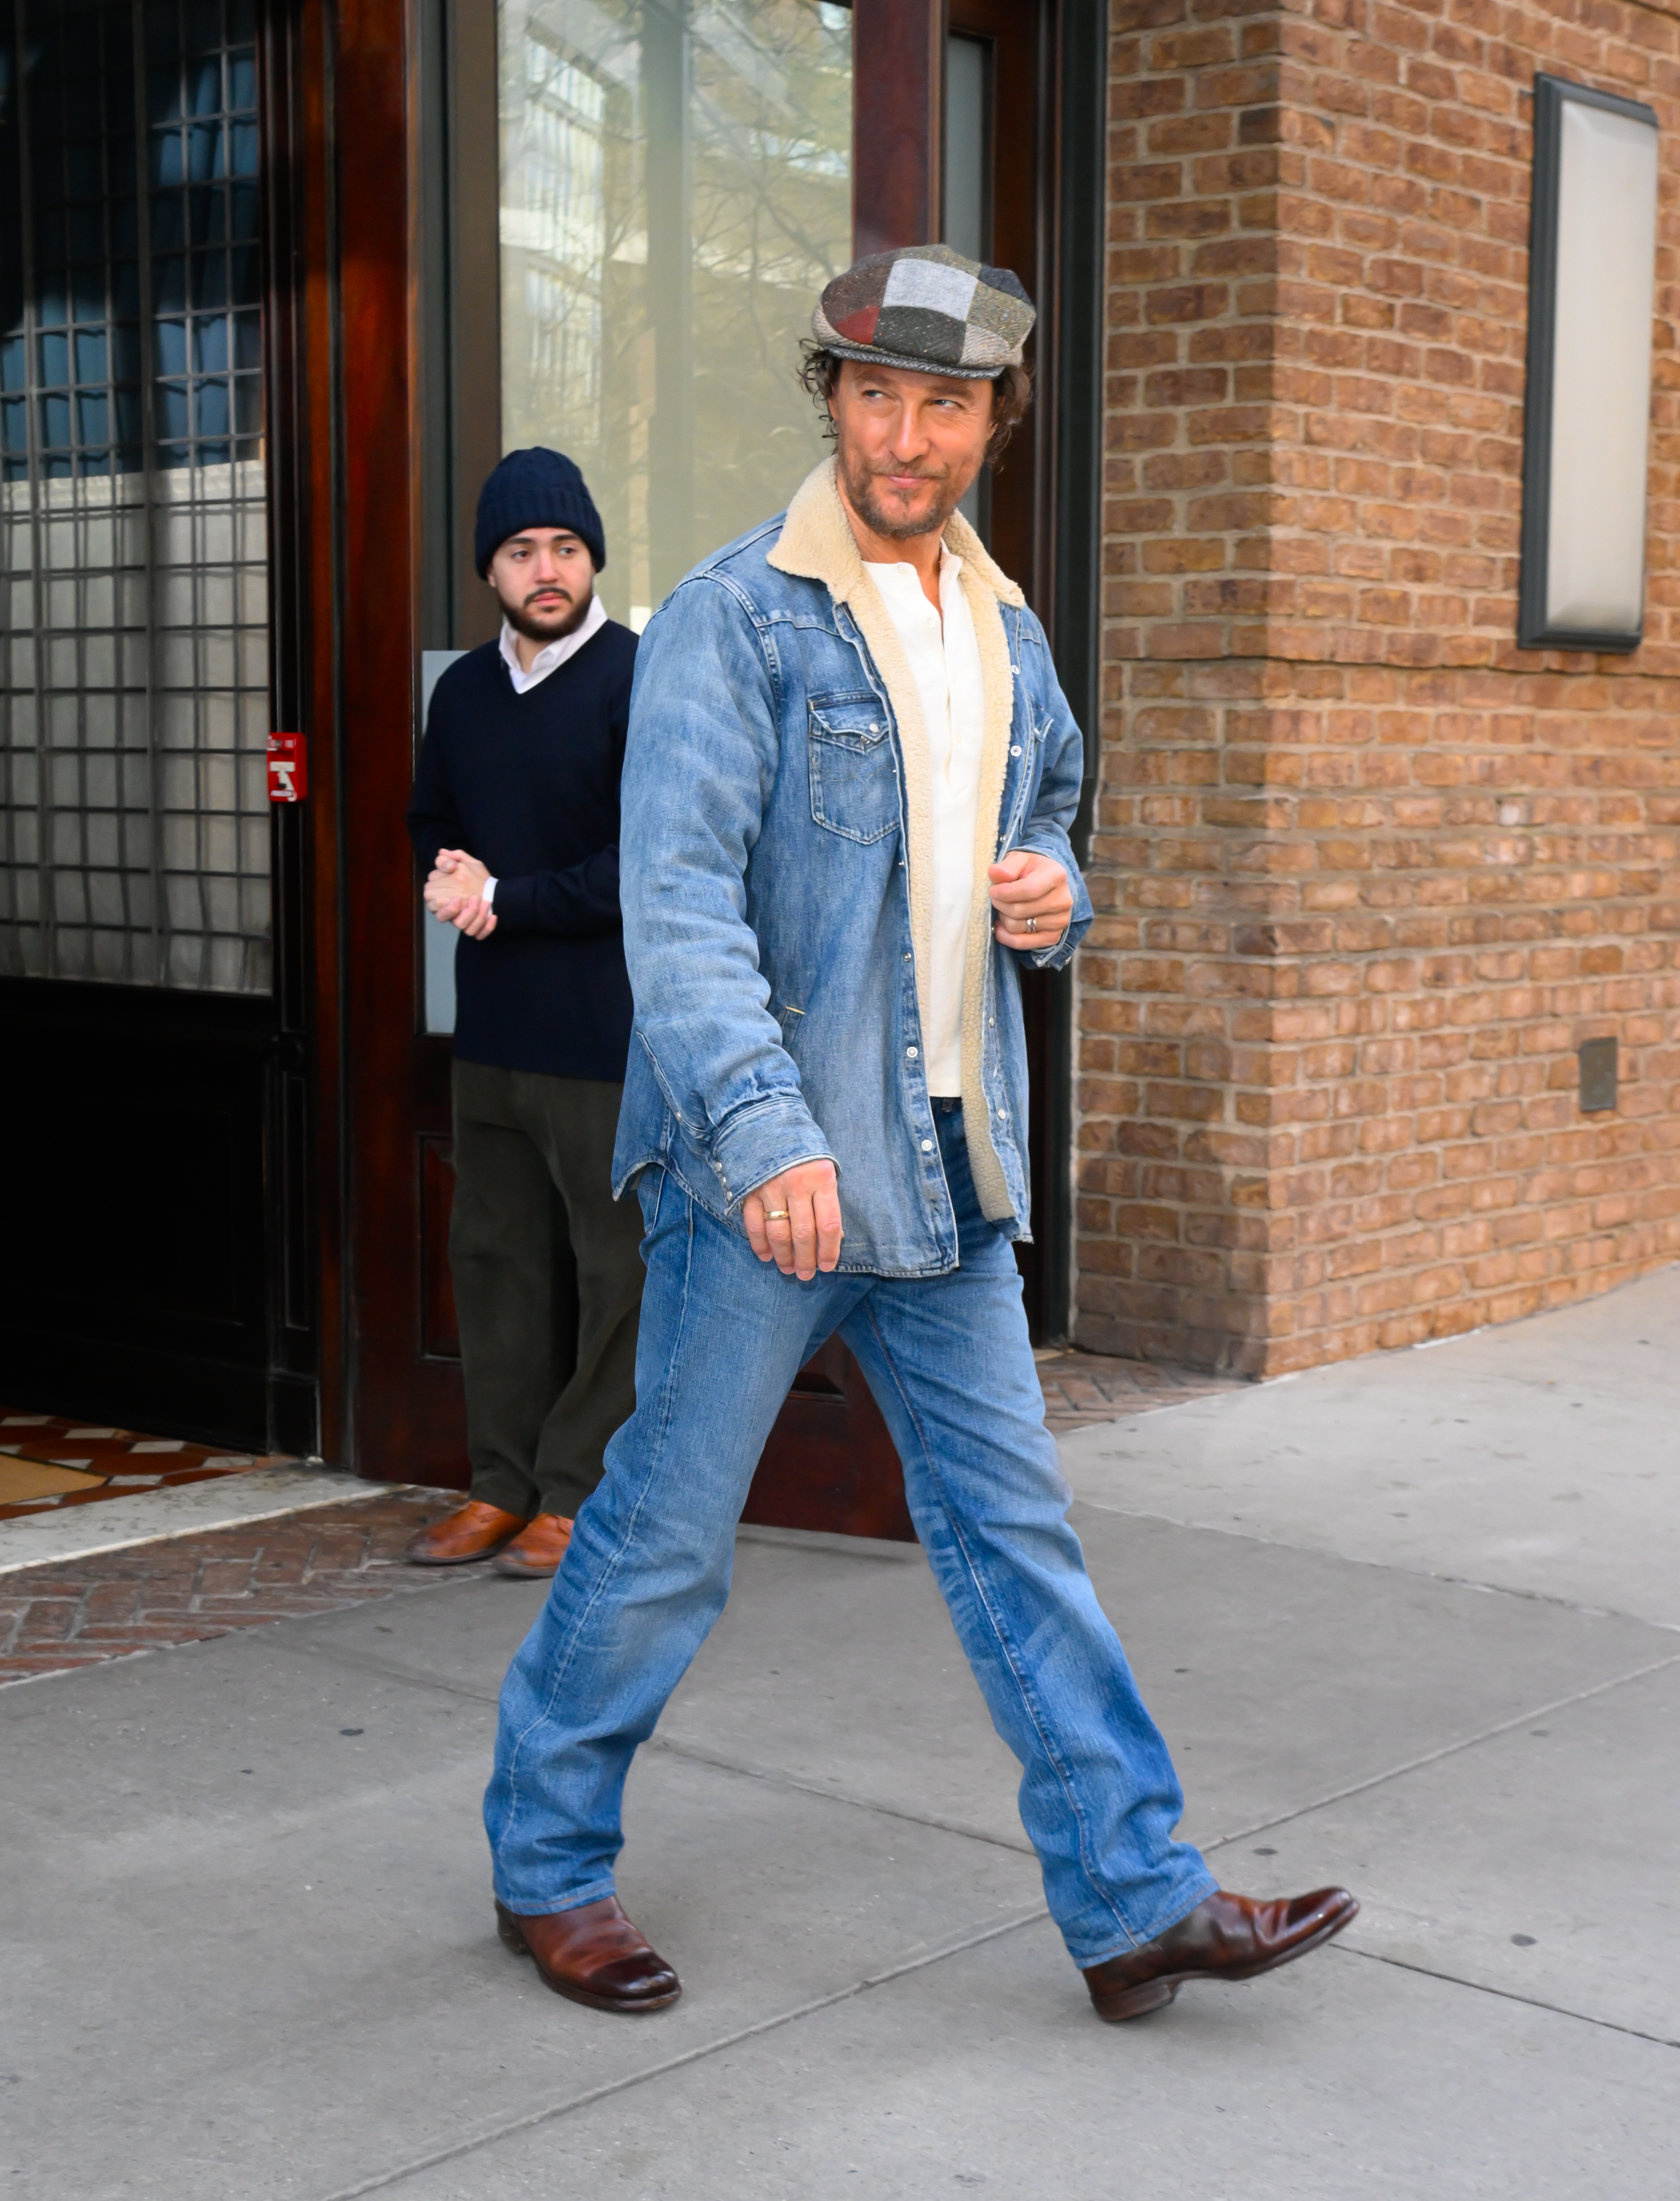 Close-up of Matthew on the street in a cap, denim jacket, and jeans